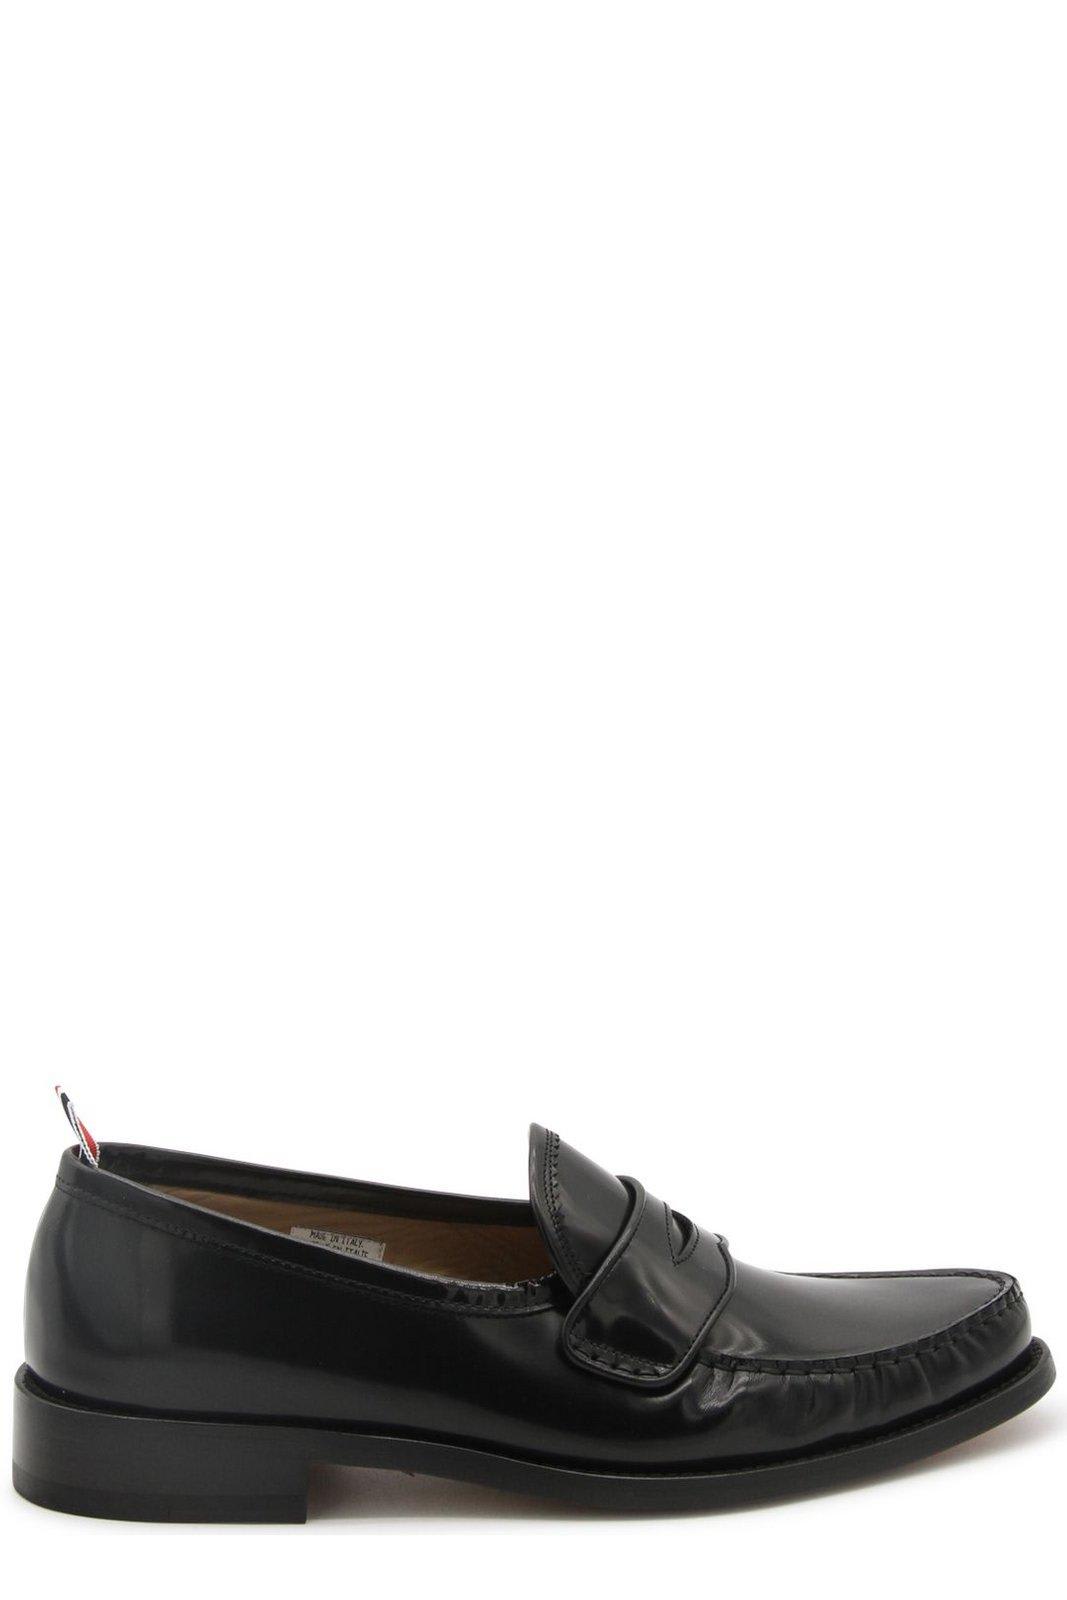 Thom Browne Almond Toe Penny-slot Loafers In Black